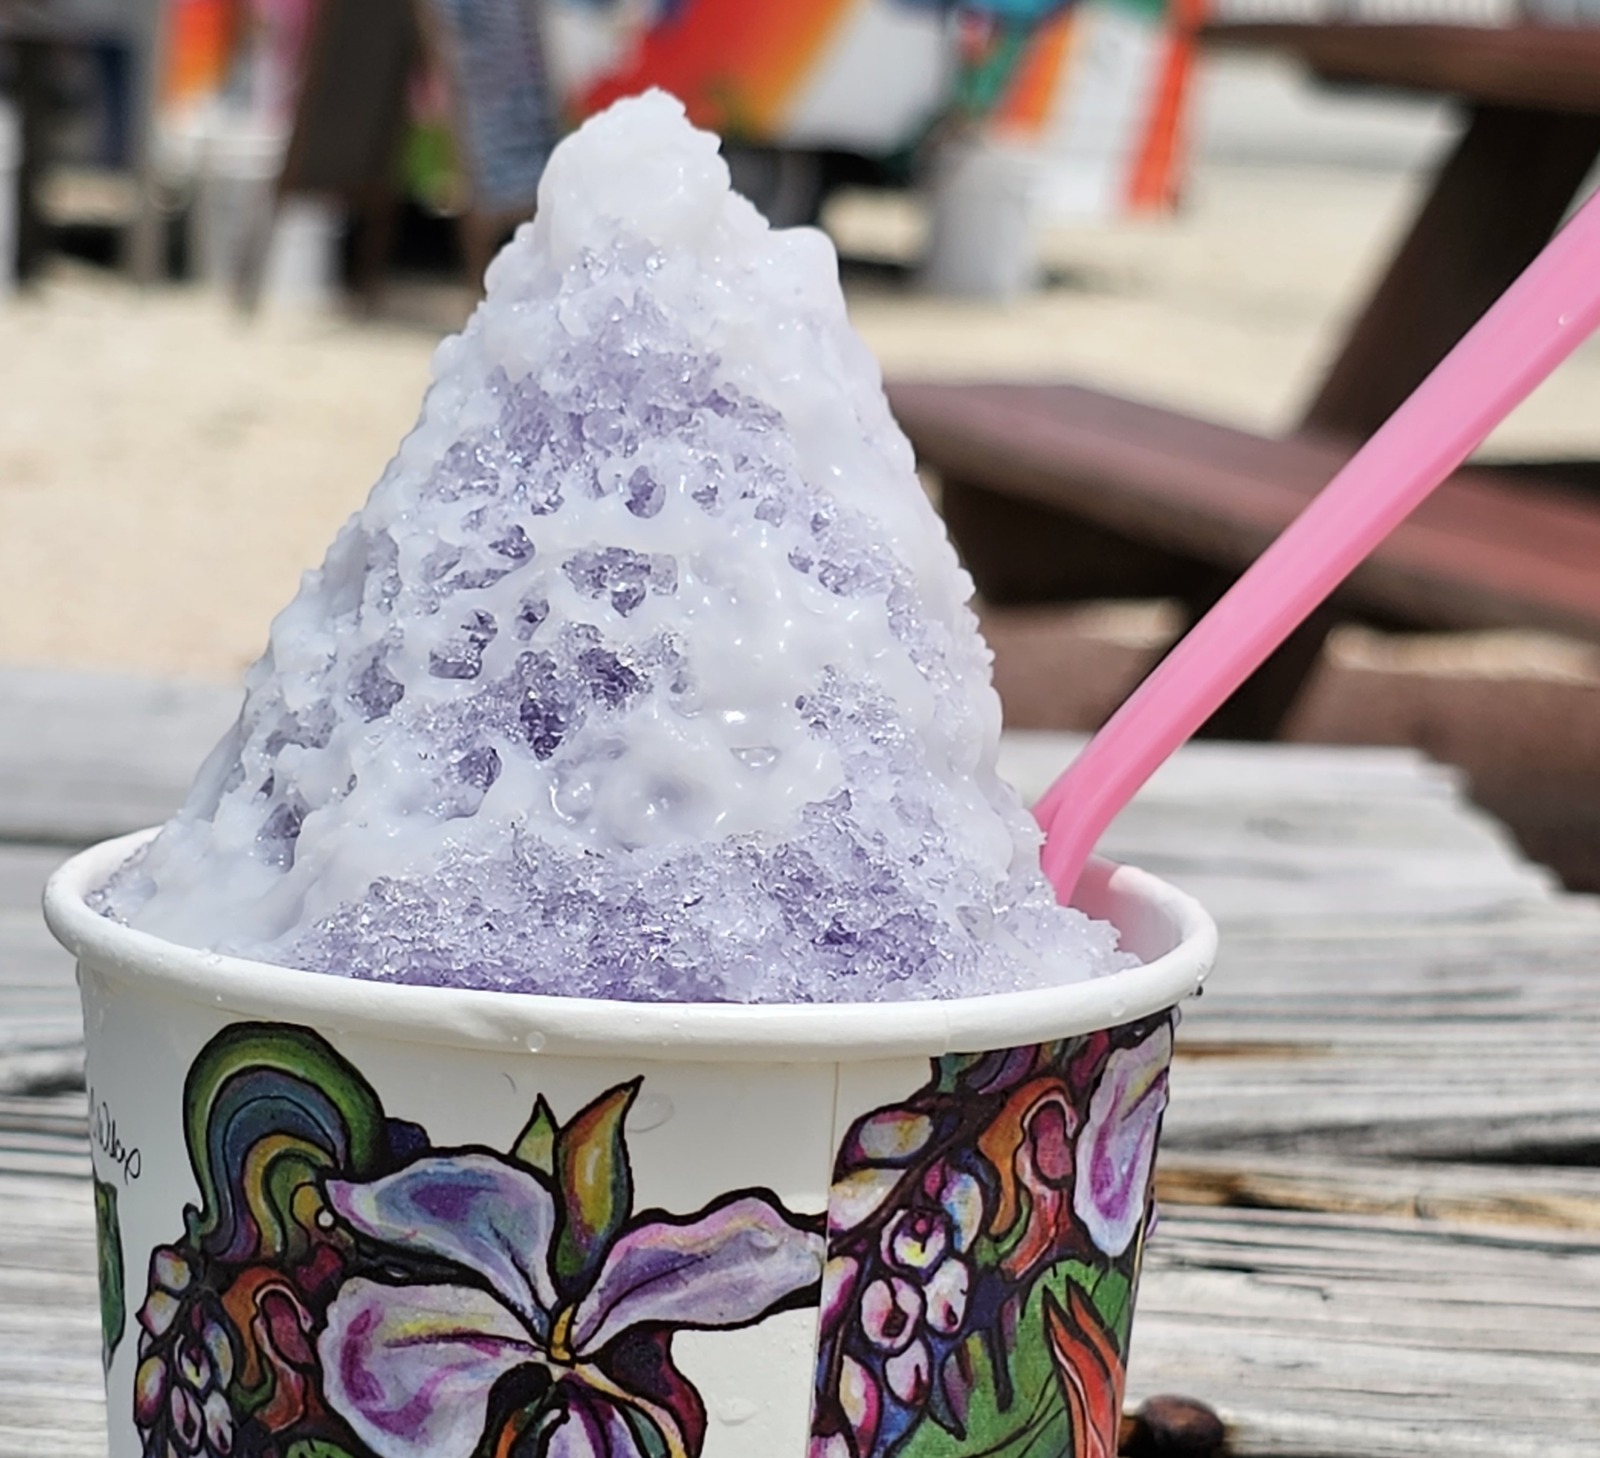 Summer fun made sweeter with the Shave Ice Attachment. What are you ma, Ice